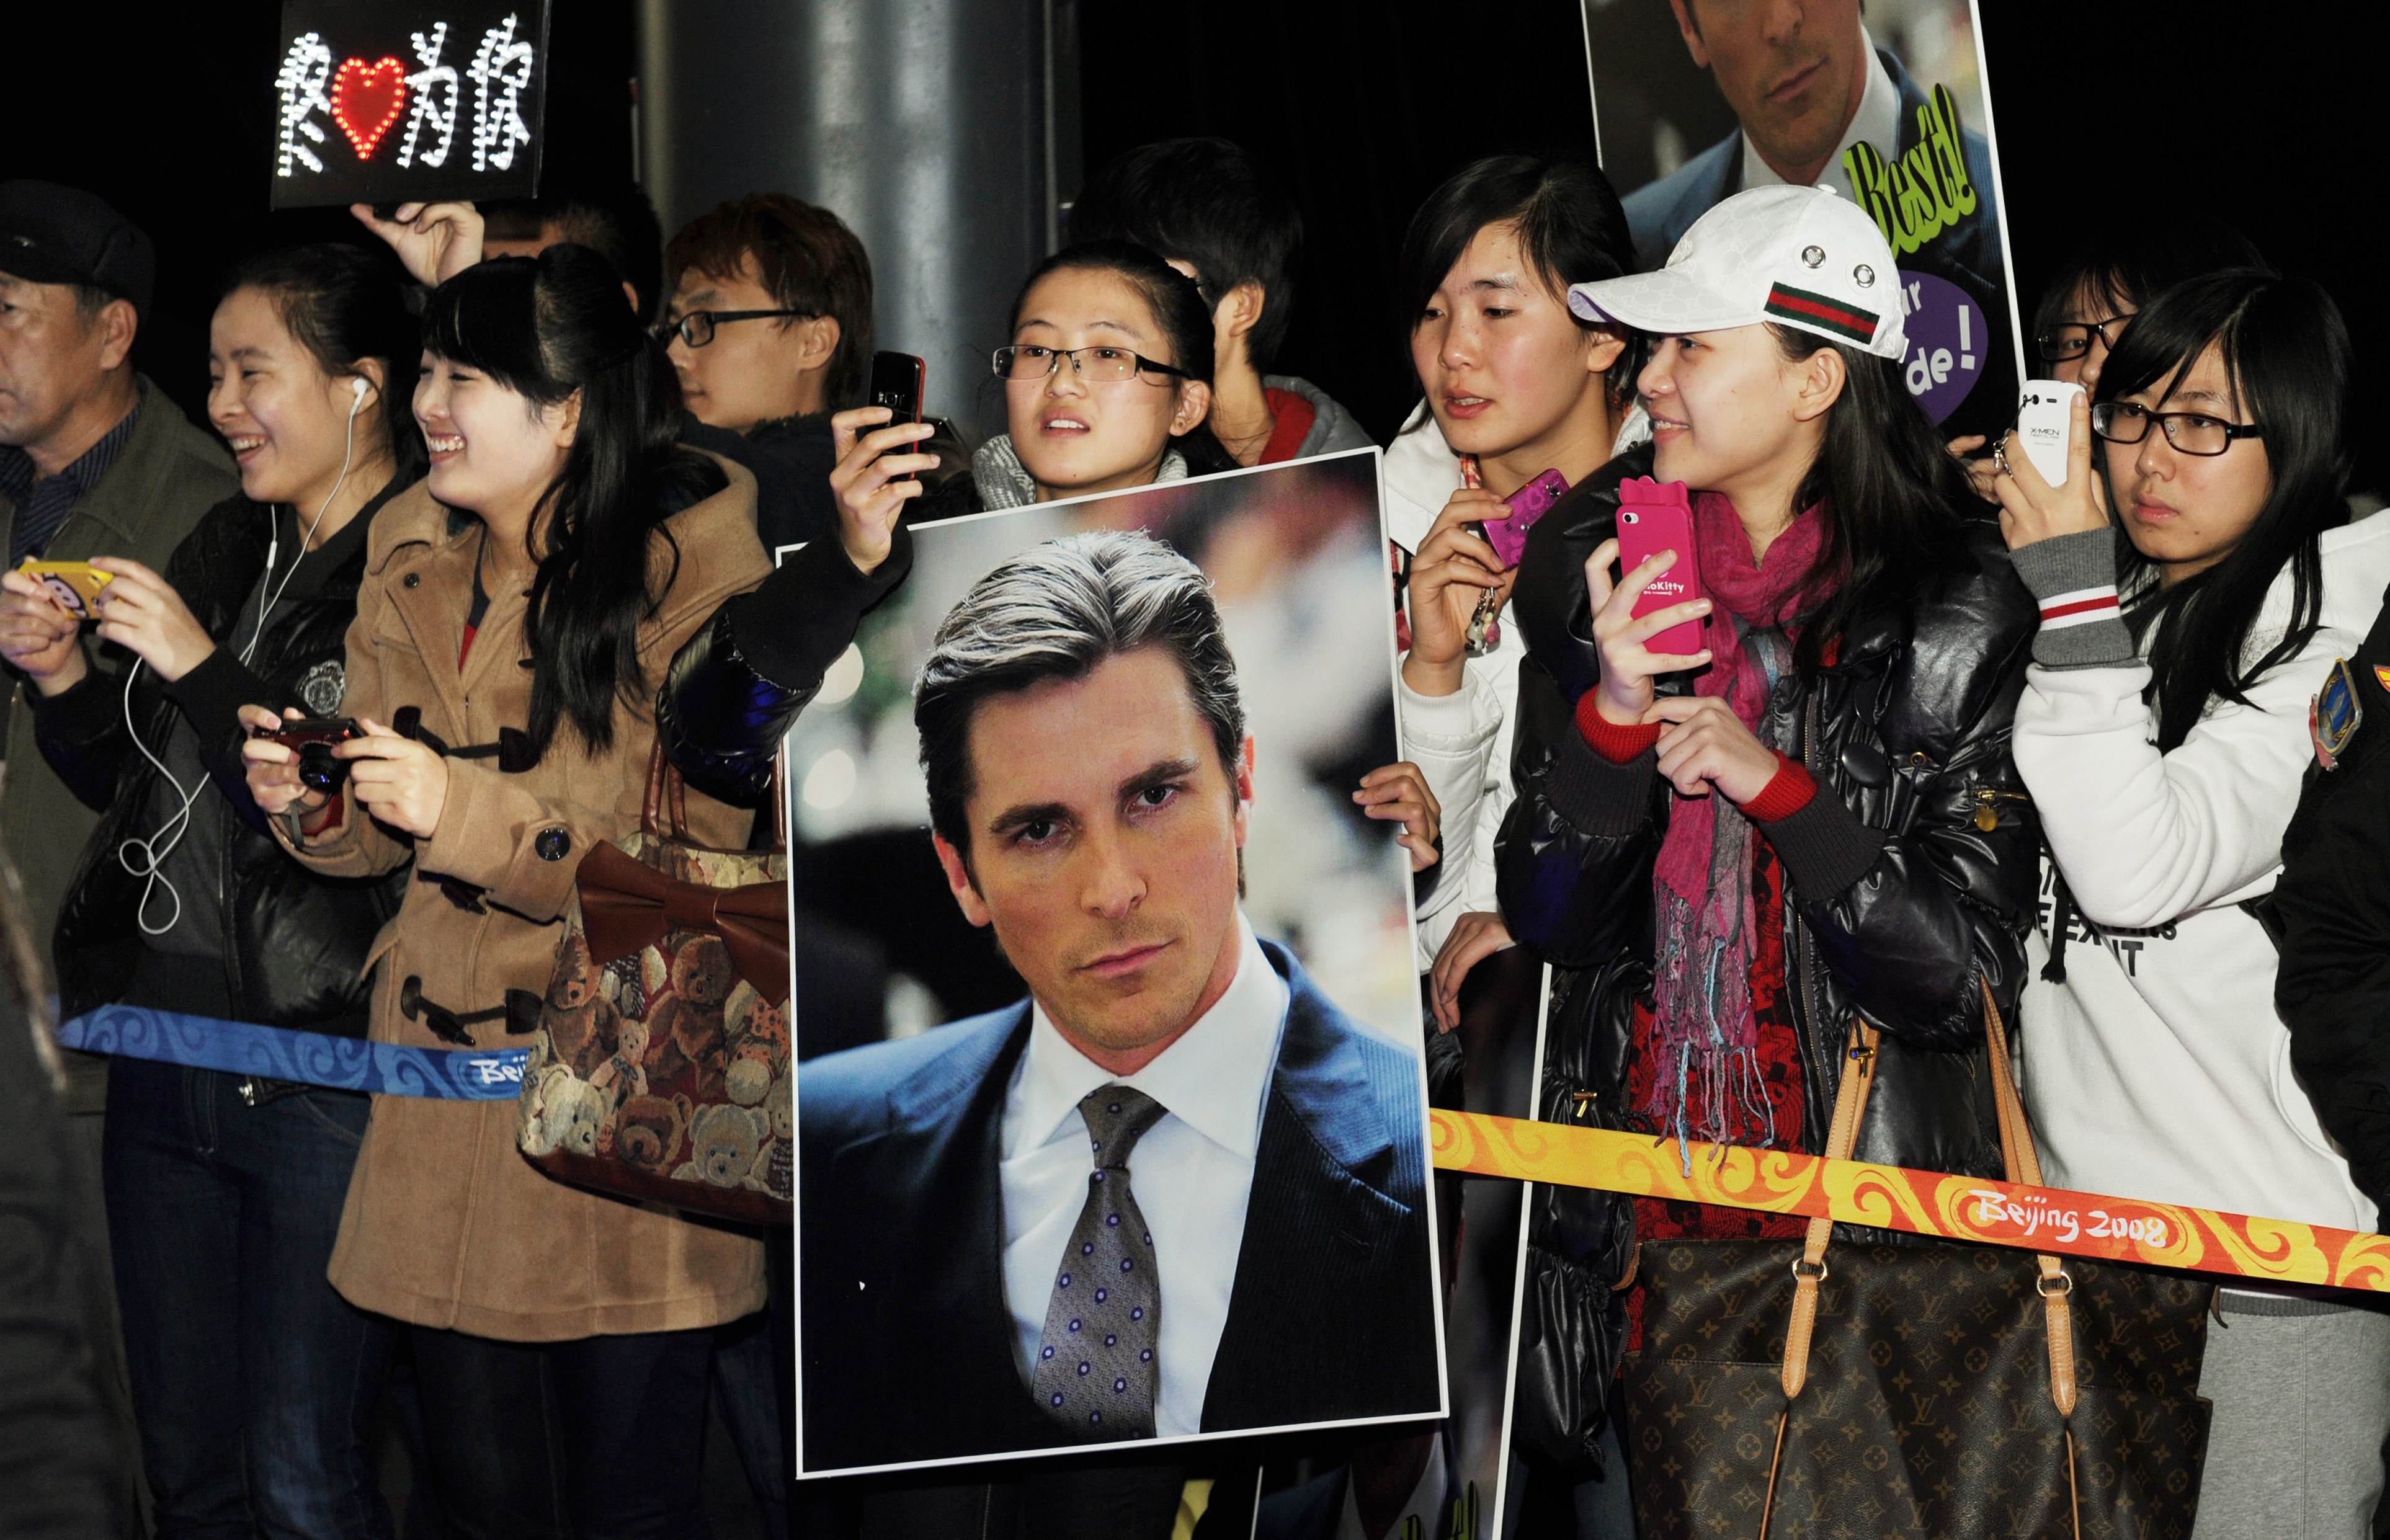 Chinese fans of Oscar winning actor Christian Bale wait as he arrives on the red carpet for the screening of the film "The Flowers of War," in Beijing on December 12, 2011. Photo: AFP